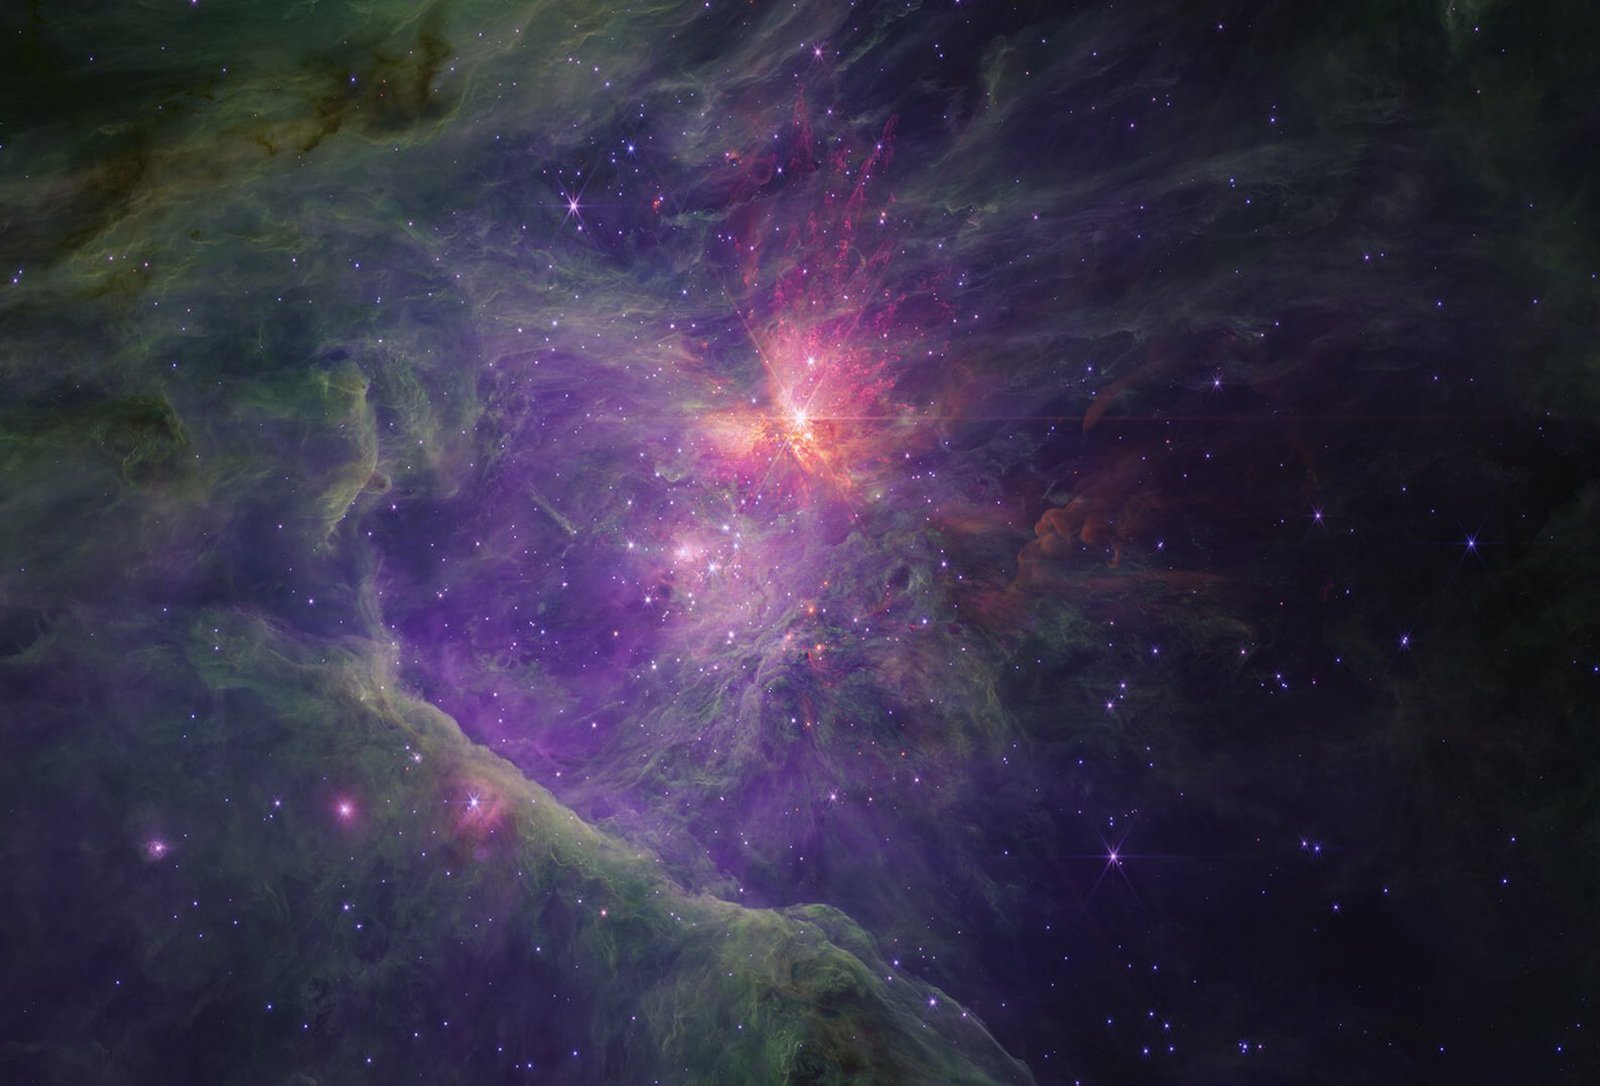 Bright orange light surrounds the Orion nebula, which can be seen as a smudge with the naked eye